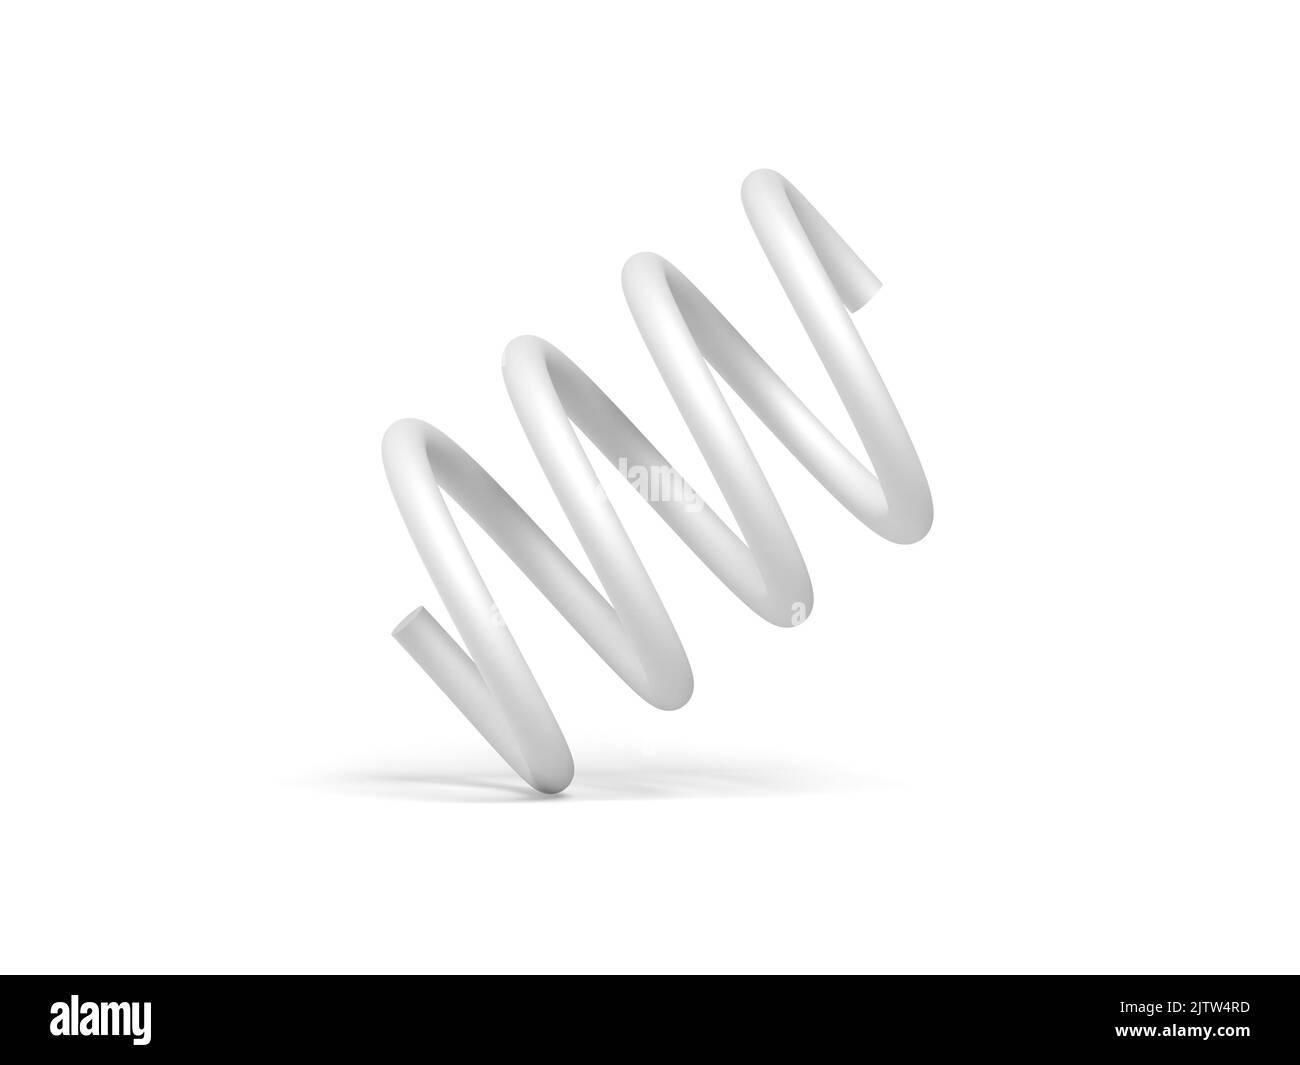 Coil spring isolated on white background. 3d illustration. Stock Photo